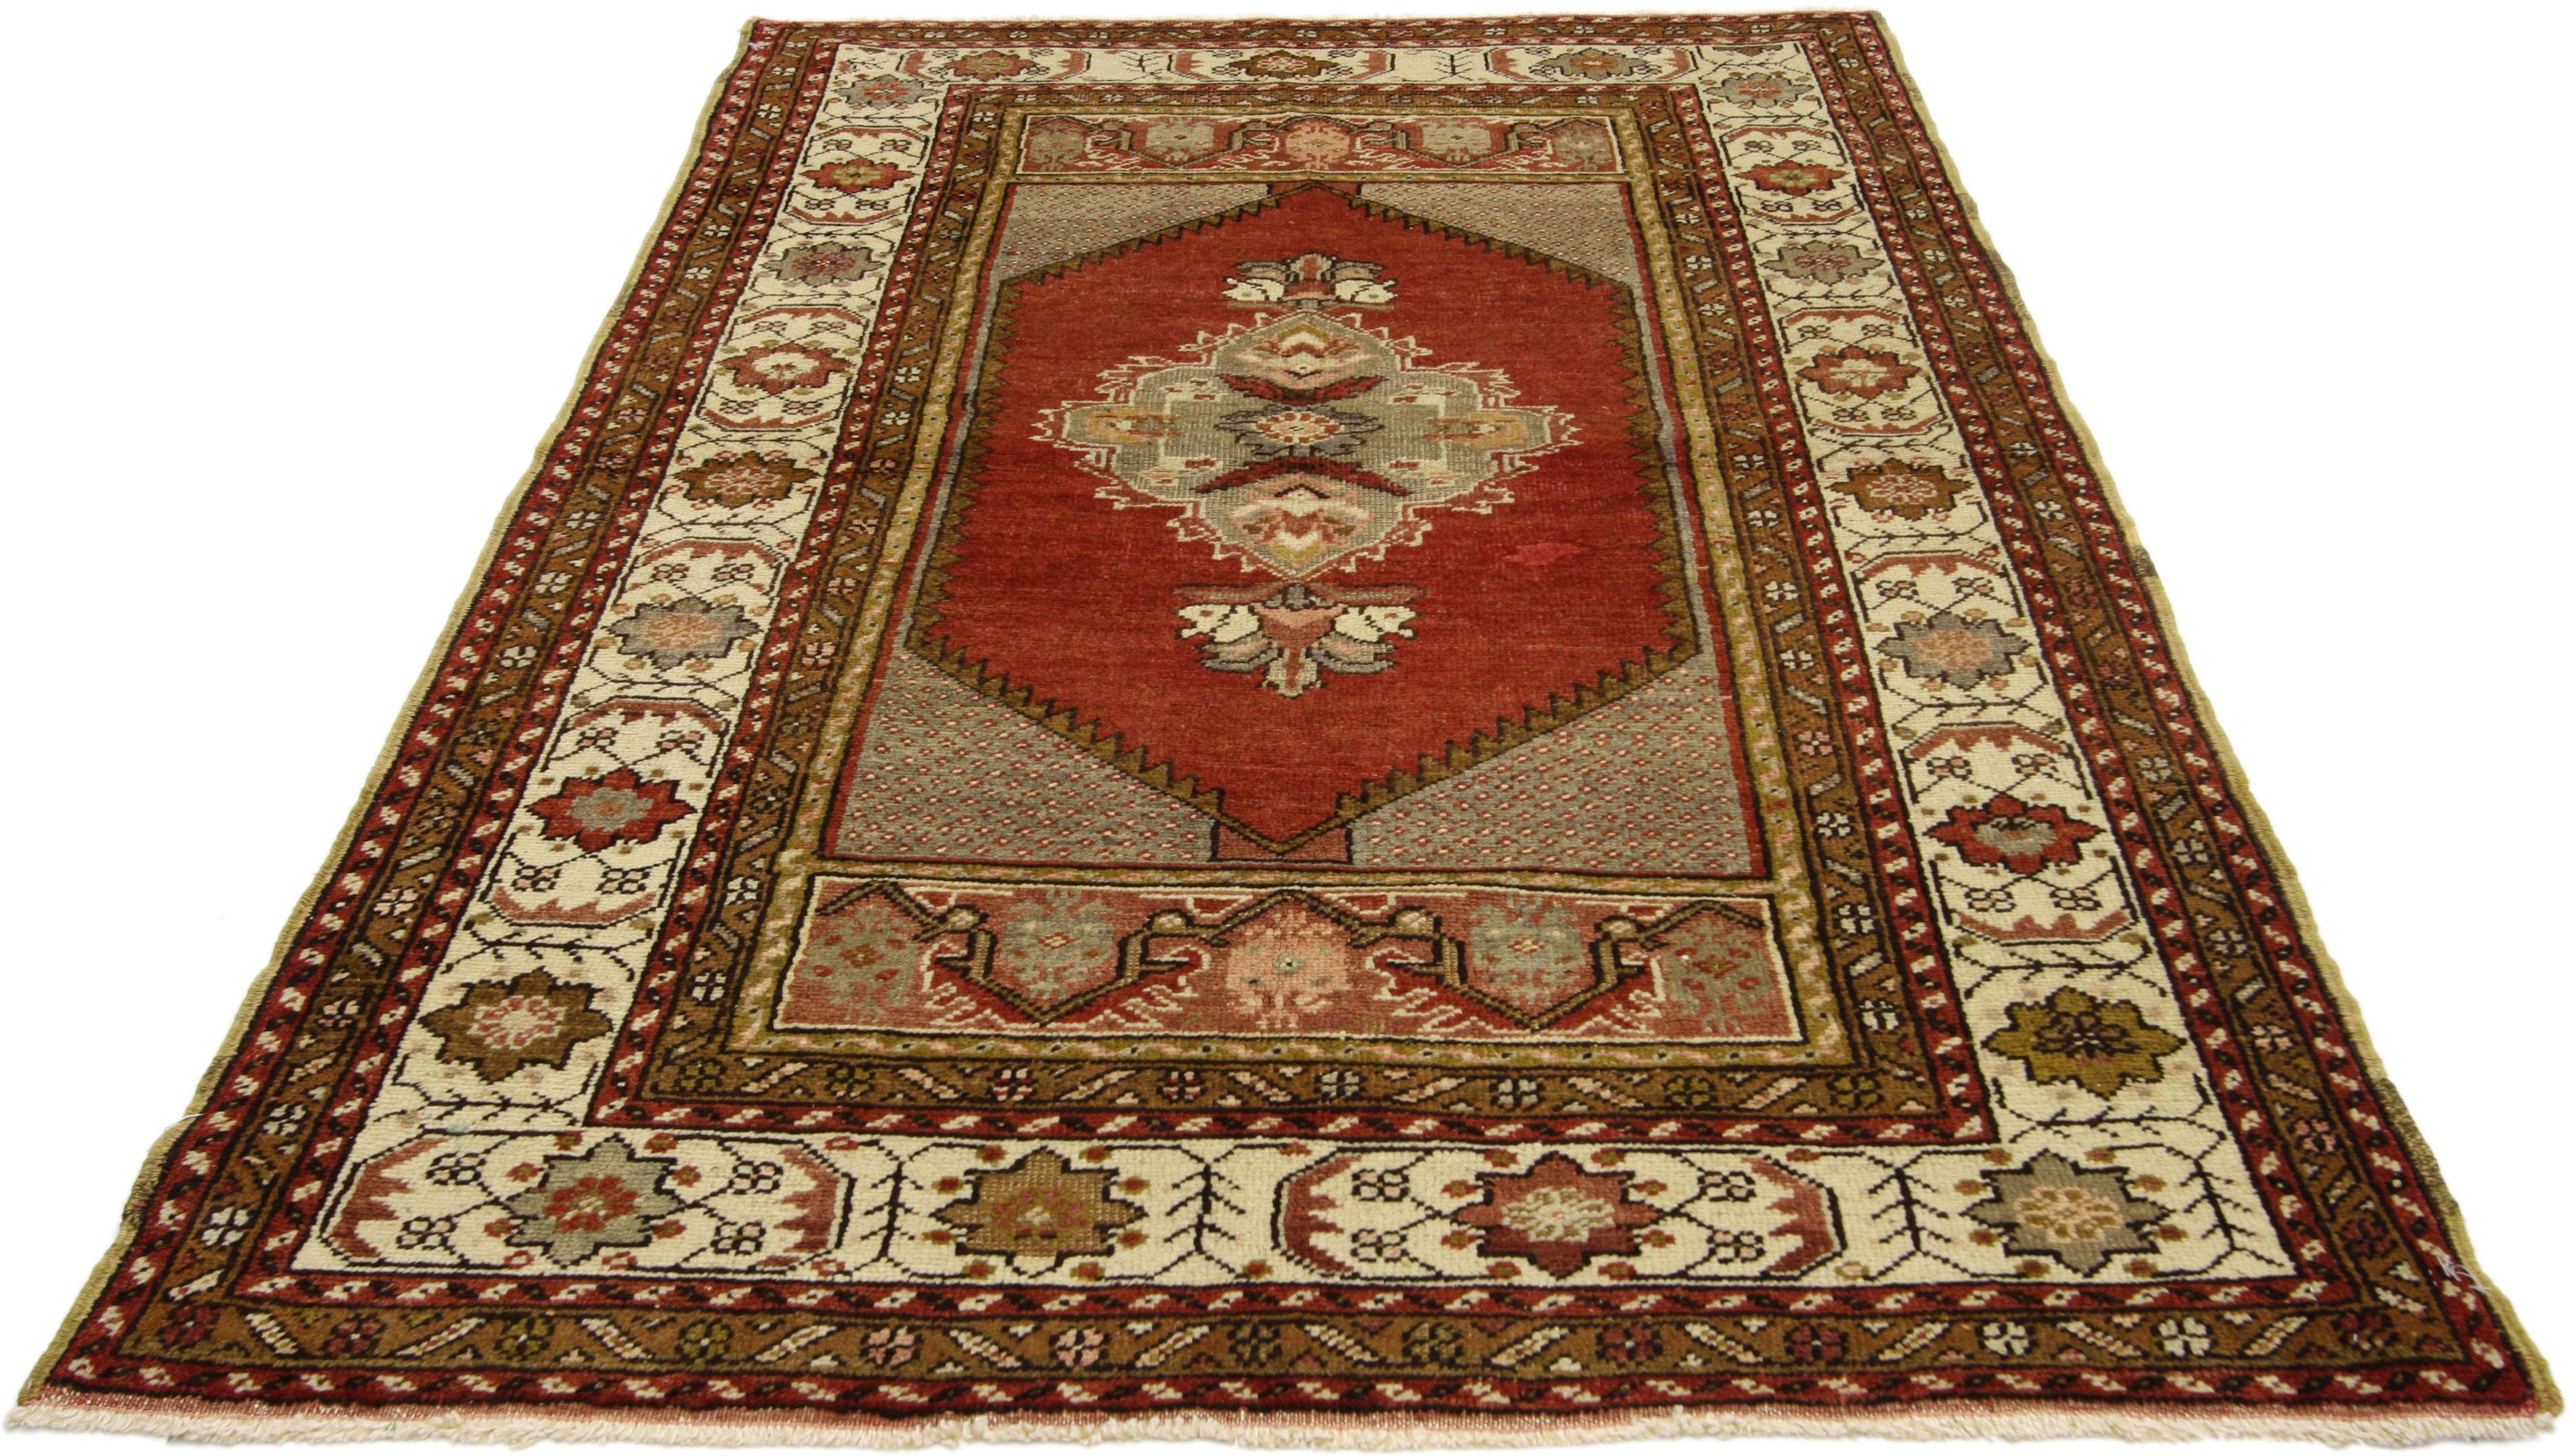 73840, vintage Turkish Oushak accent rug, entry or foyer rug. This hand knotted wool vintage Turkish Oushak rug features a cusped centre medallion anchored with blooming finials in an abrashed scarlet field. A simple zigzag saw-tooth border frames